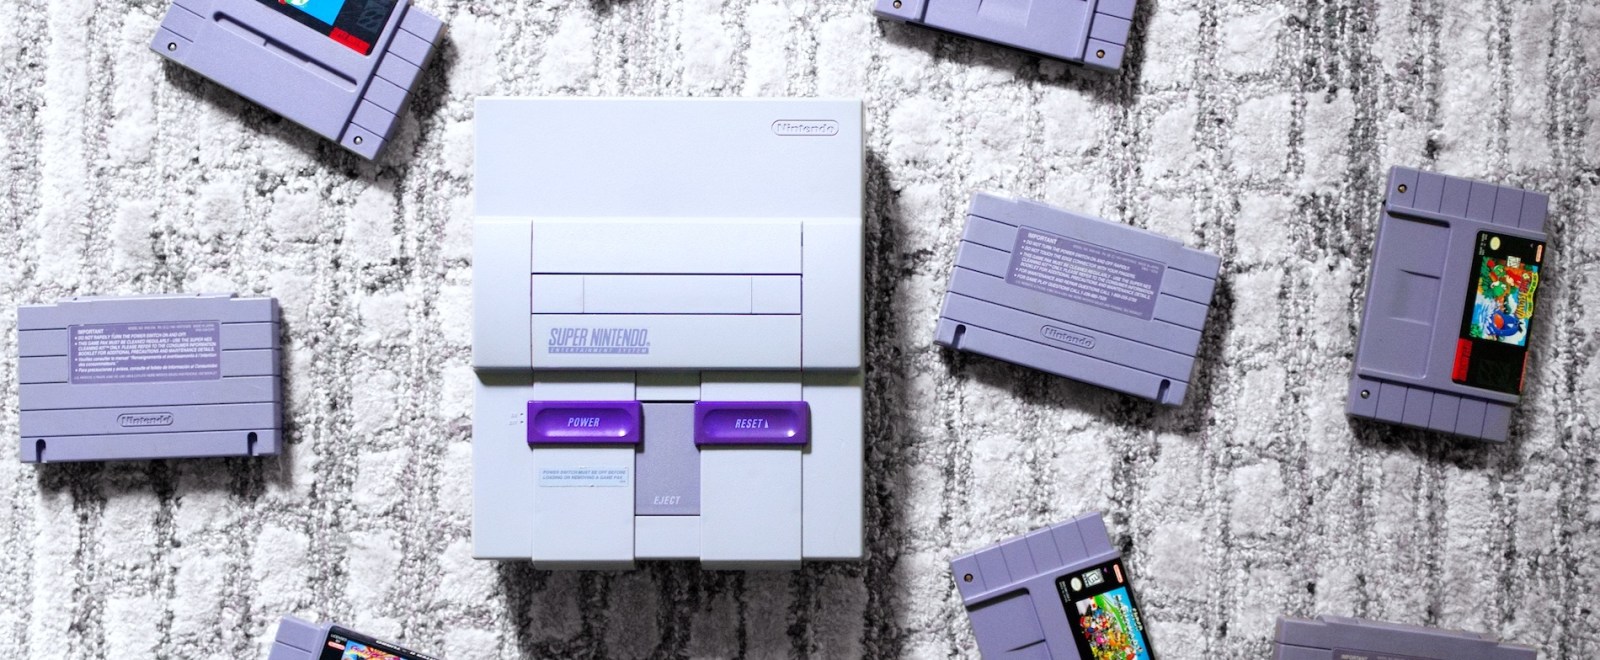 OC] The 100 Best Super Nintendo Games, According To Over 200,000